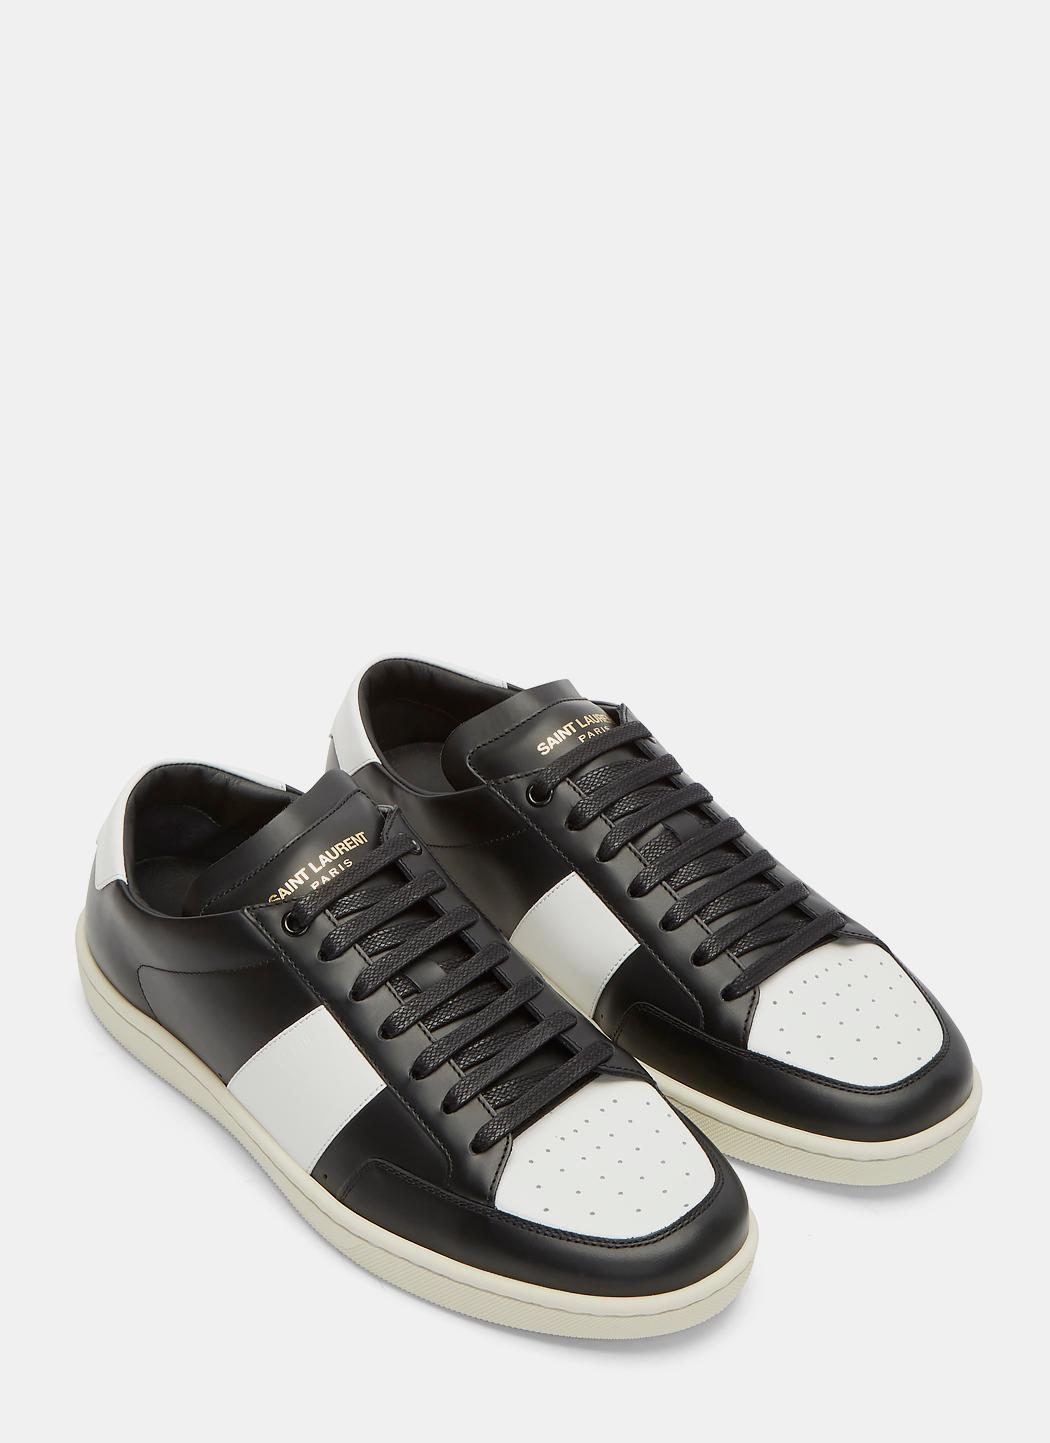 Men's Sl/10 Low-top Sneakers In Black And White